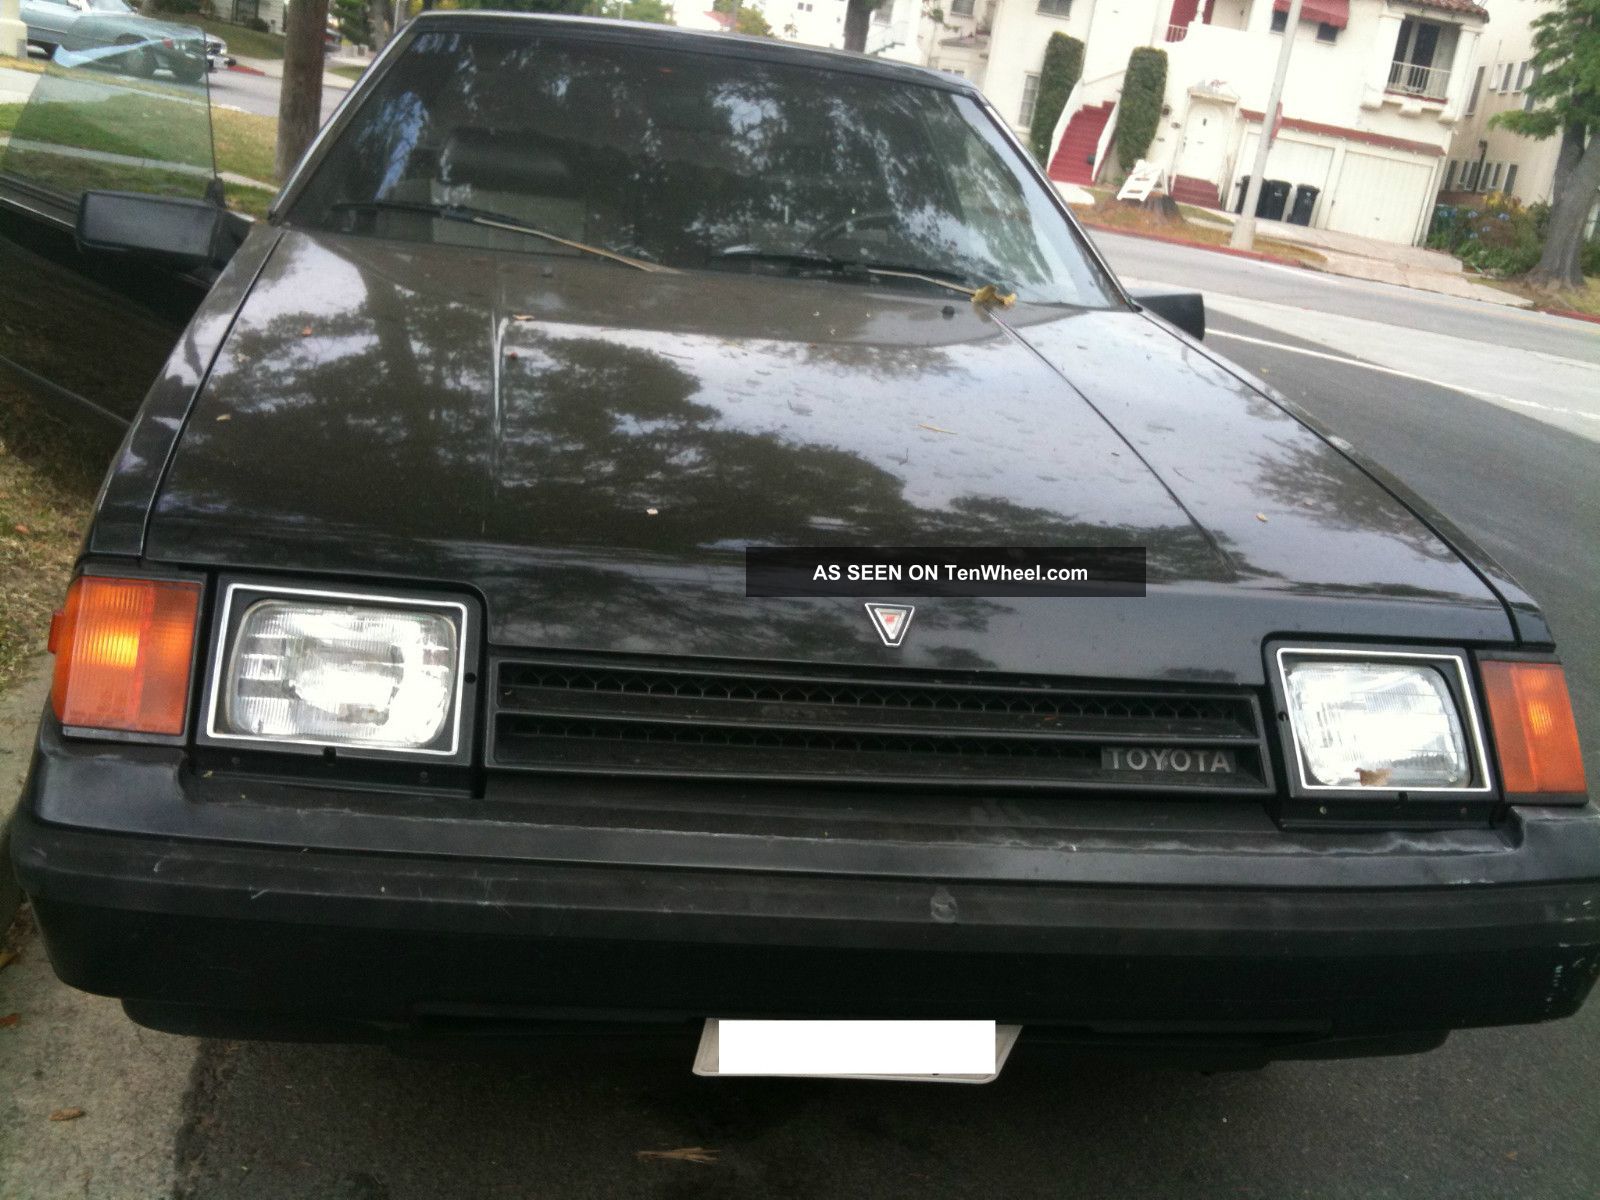 1983 Toyota Celica Gt Hatchback 22 - R - Engine,  Full Maint.  Receipts Incl. Celica photo